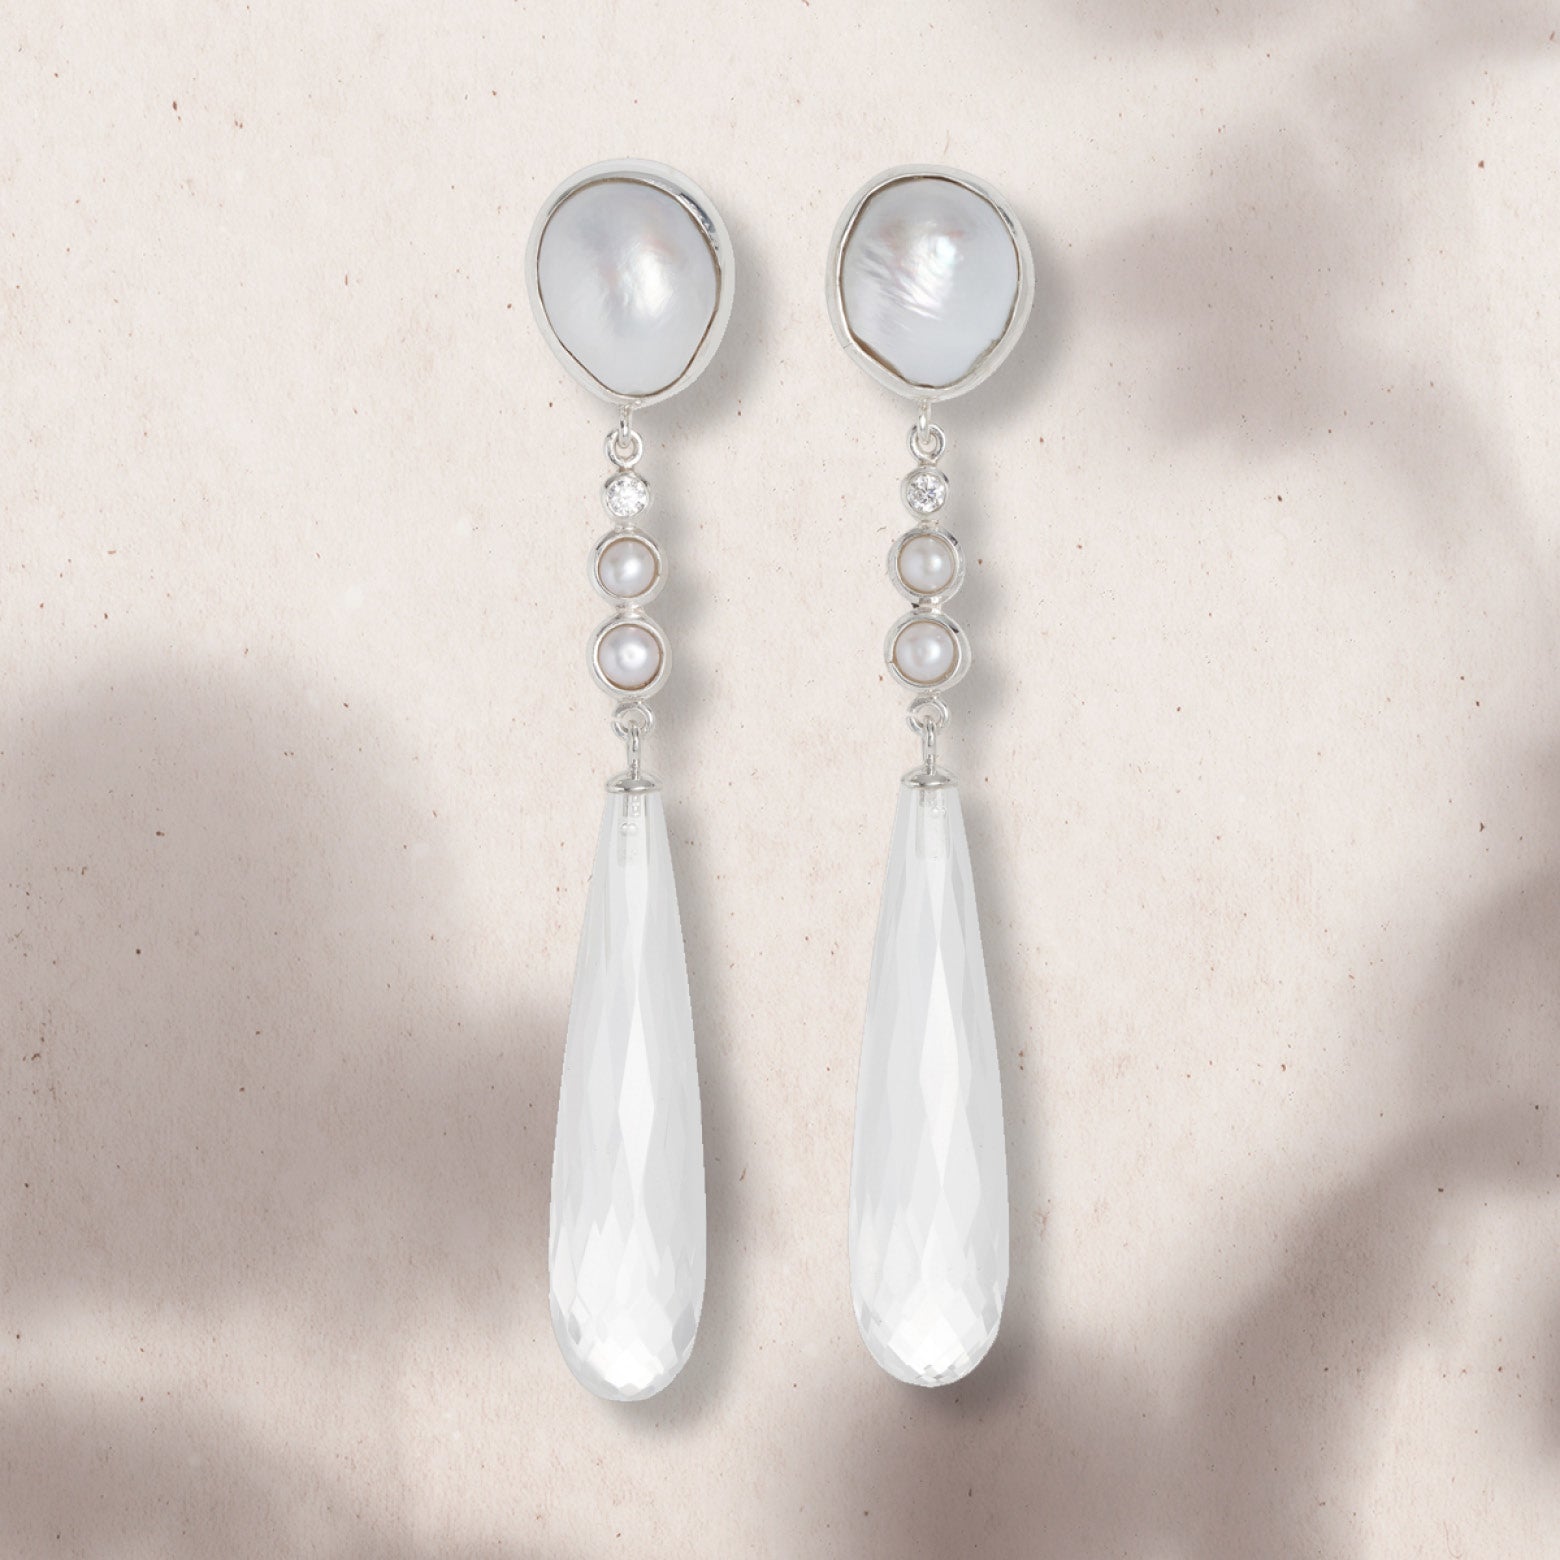 Flat lay of drop earrings with three pearls and a faceted quartz drop set in silver